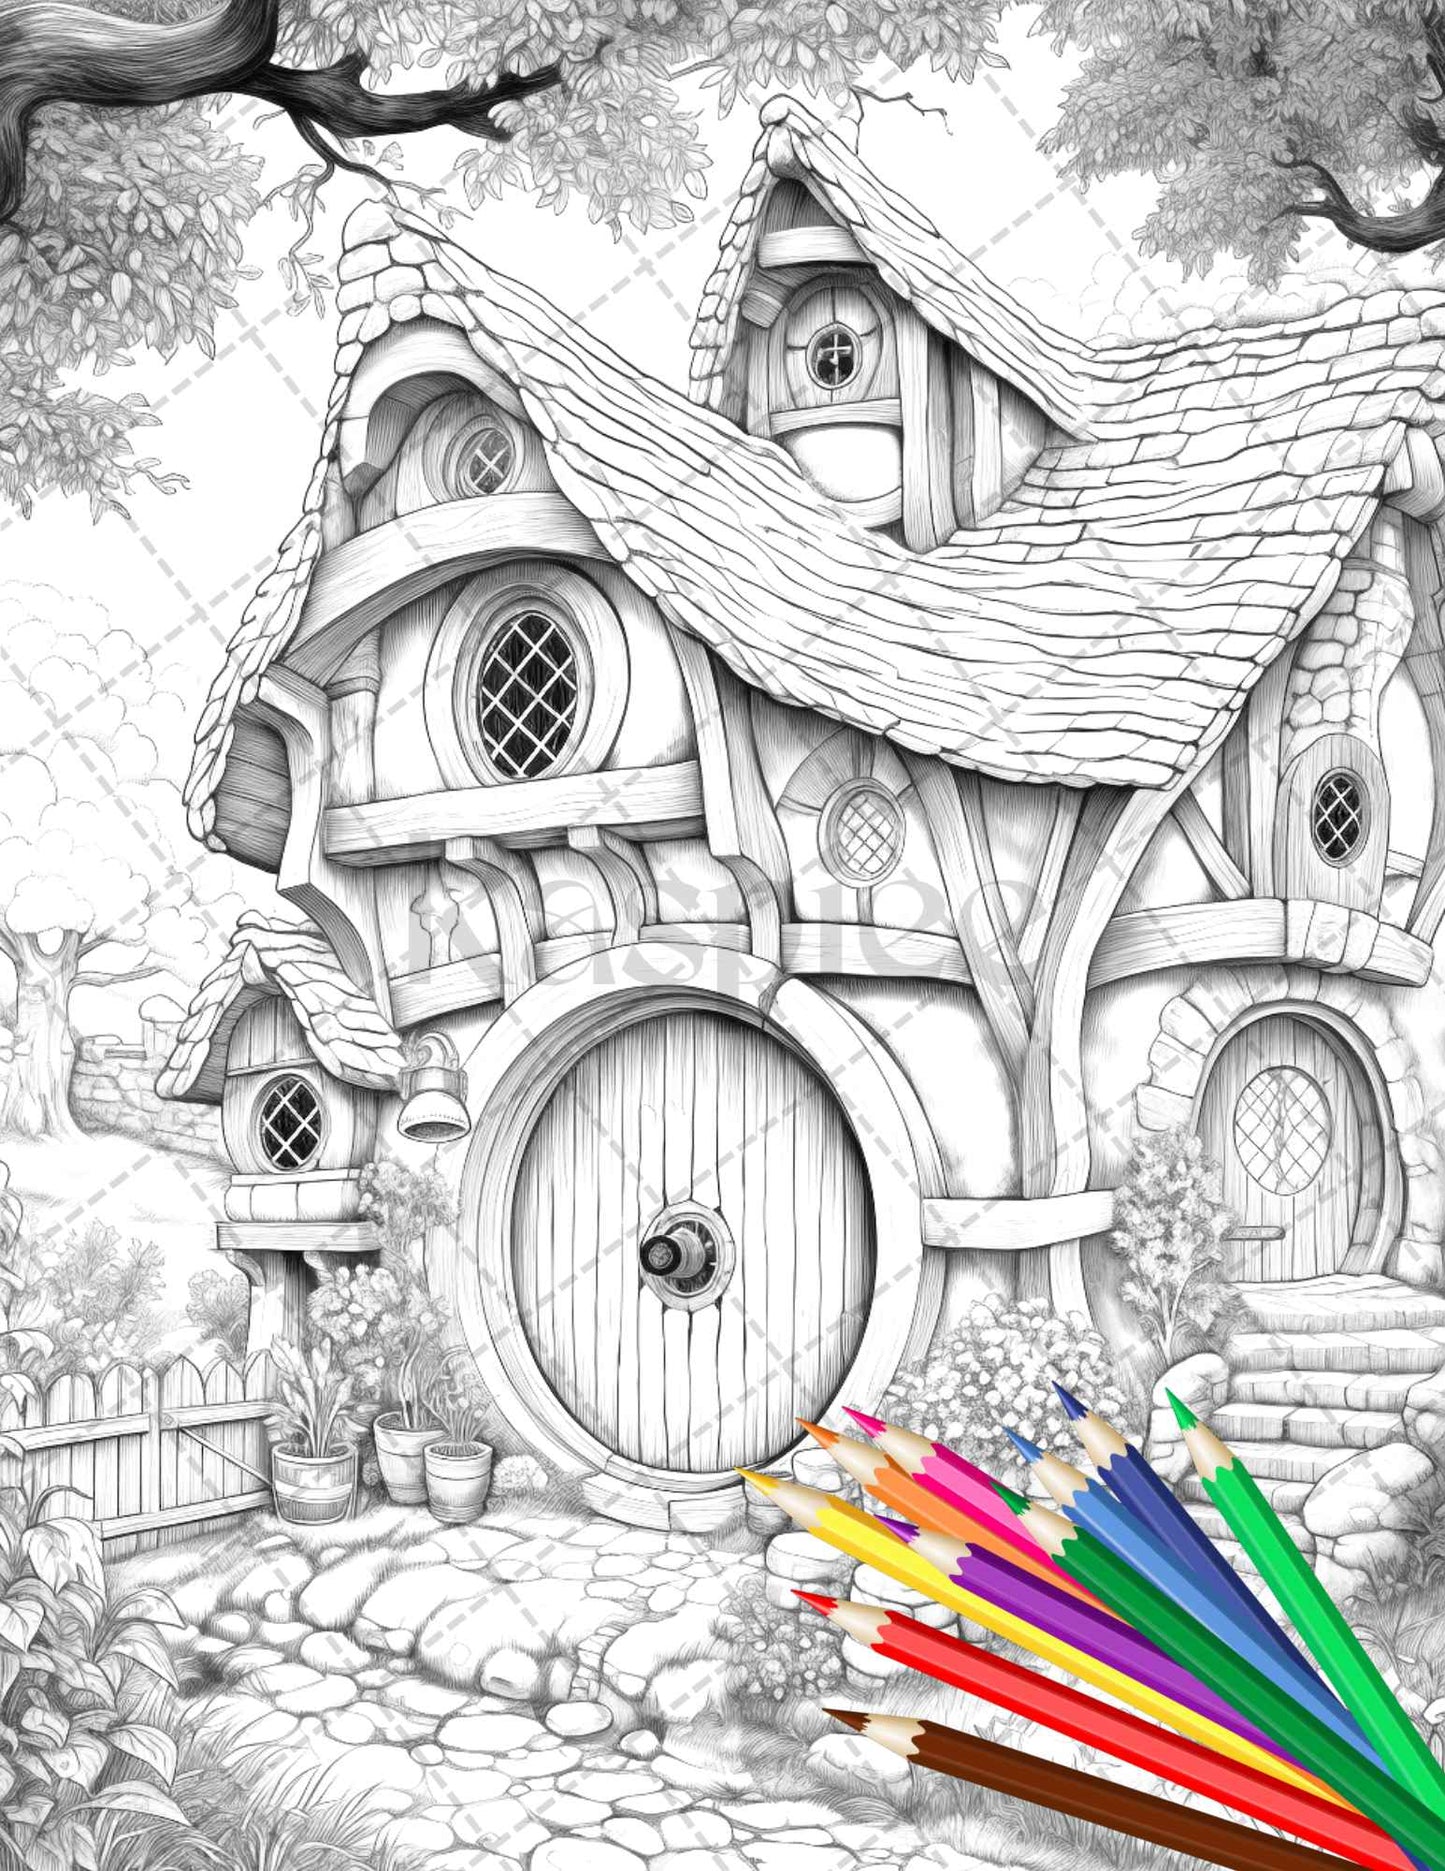 43 Enchanted Hobbiton Houses Grayscale Coloring Pages Printable for Adults, PDF File Instant Download - raspiee